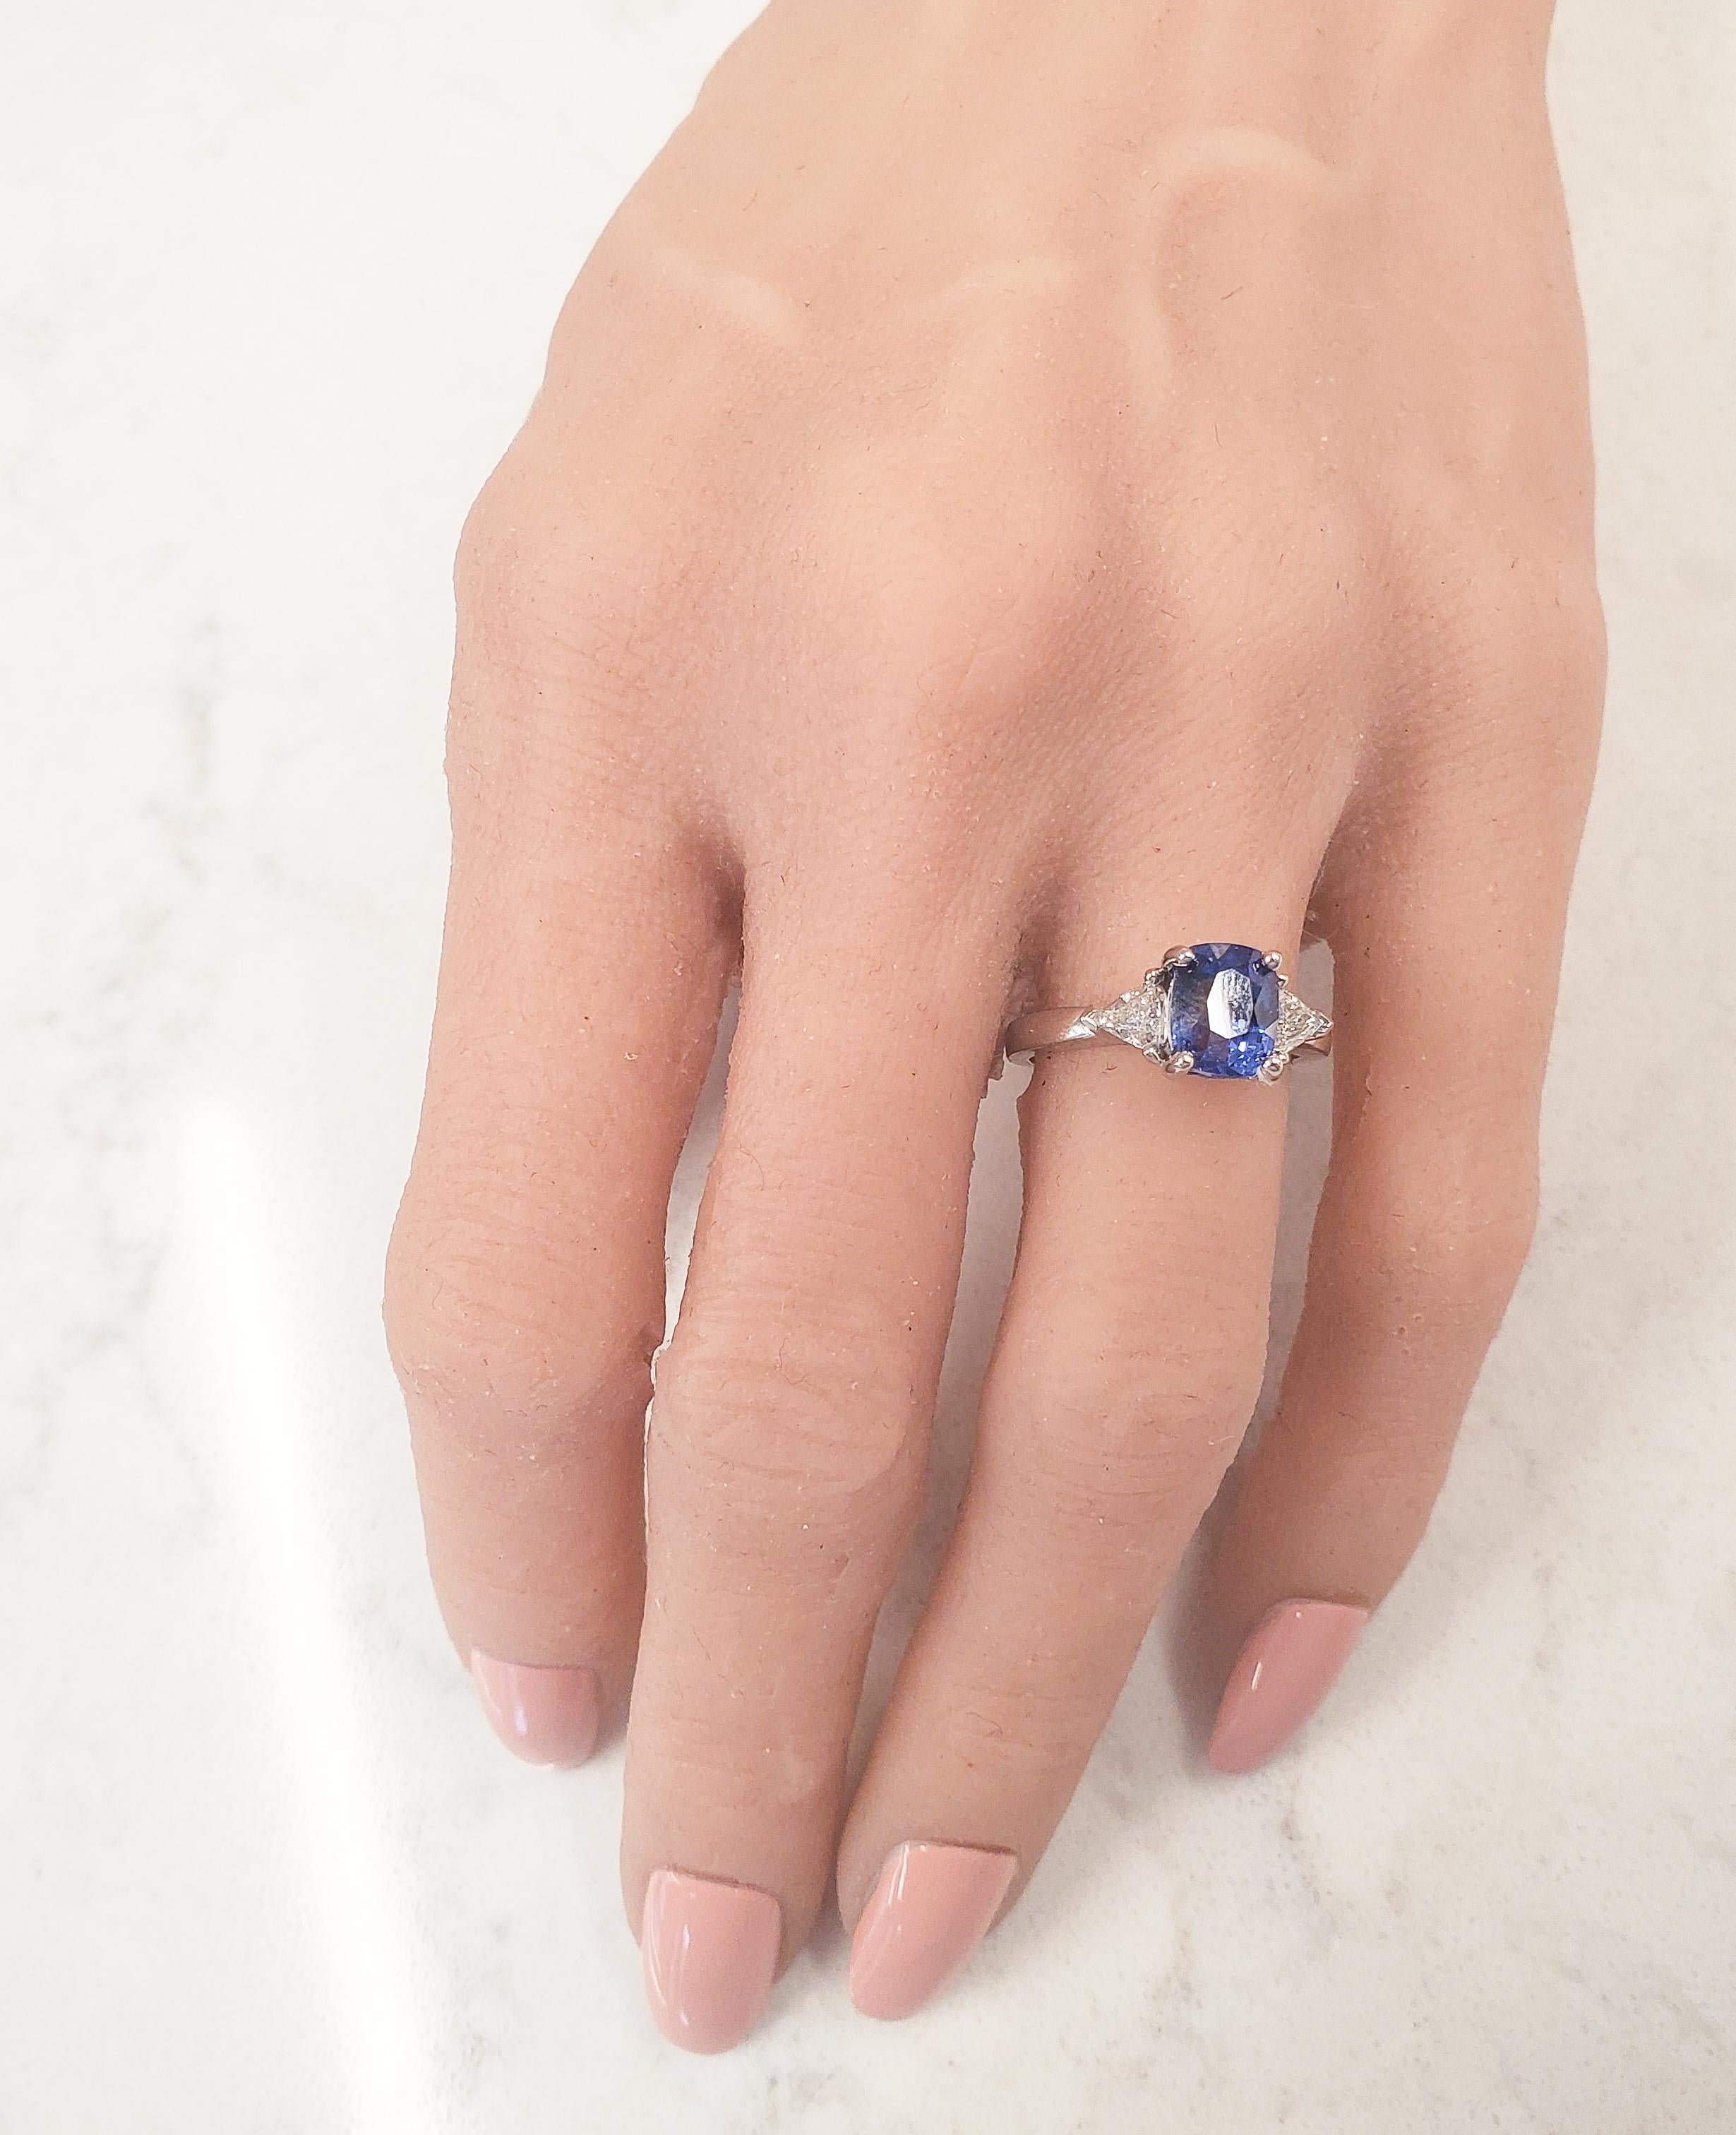 Vibrant pops of color and scintillation are on full display with this breathtaking custom made 18 karat white gold cocktail ring. A fine quality cushion-cut sapphire is secured in a four prong setting with a weight of 2.90 carats, displaying a fine